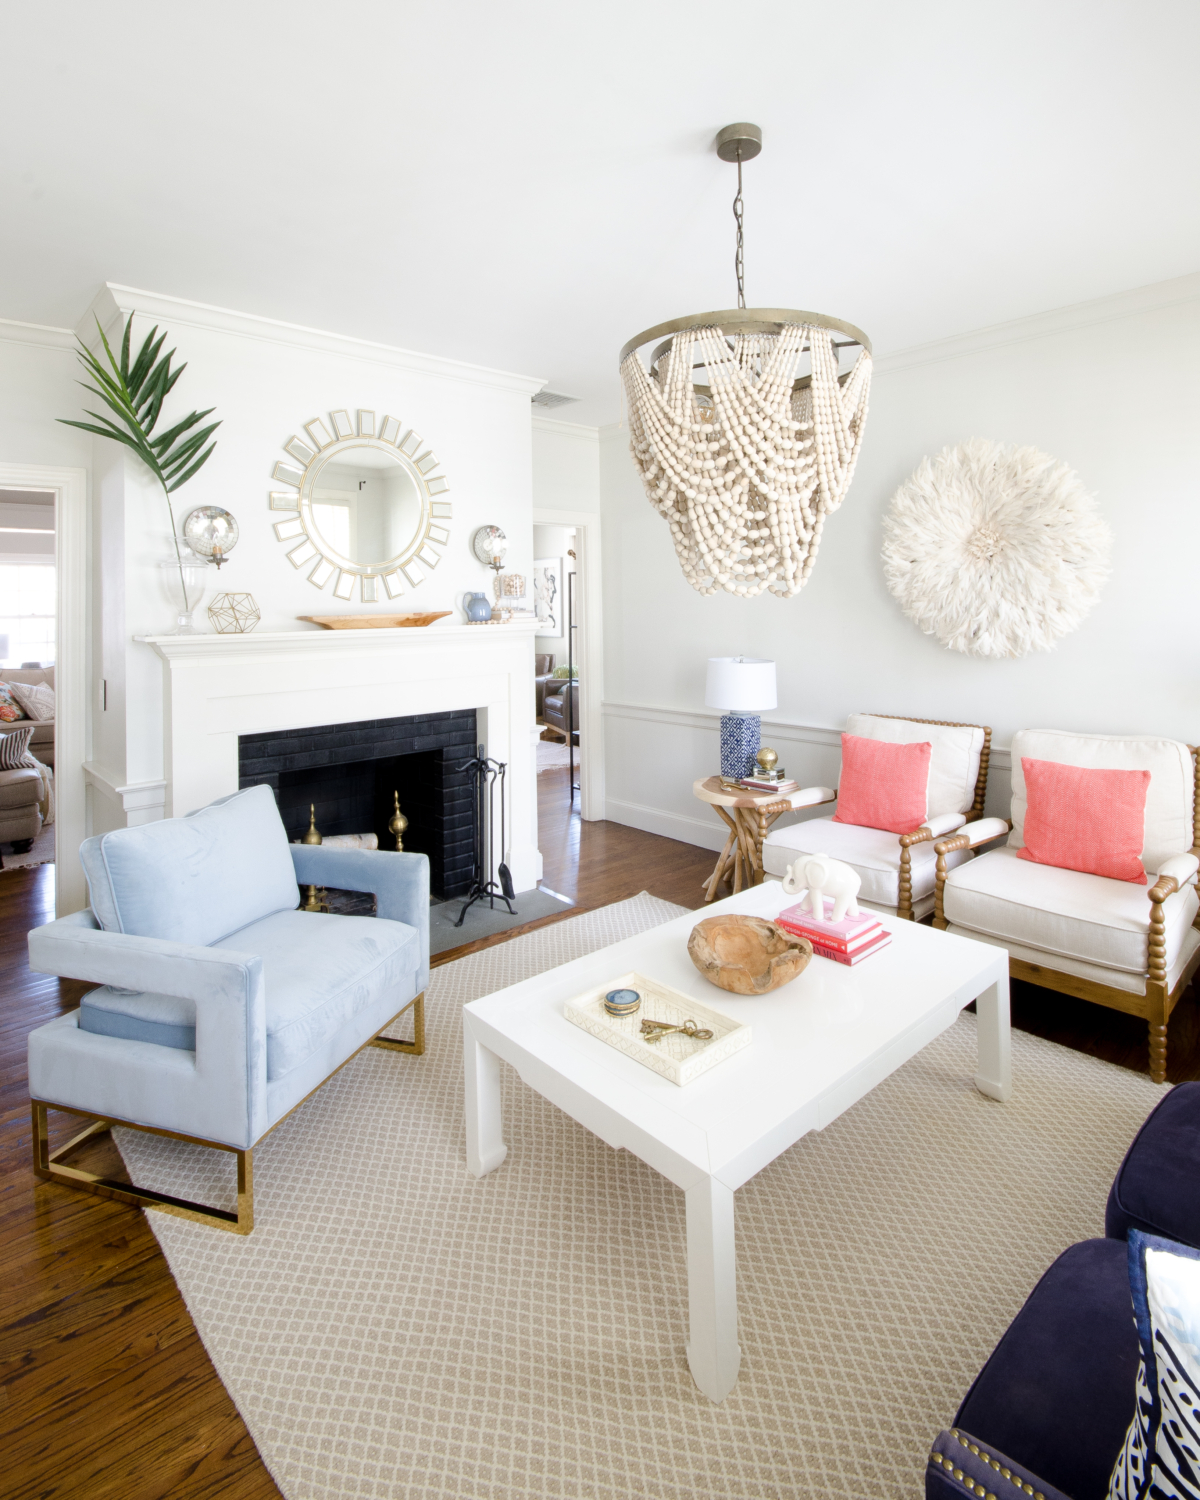 Classic living room design with a slight boho spin. A simple palette of blue, white, and coral keeps the room feeling soft and neutral with a just a bit of color. A draped beaded pendant light is the centerpiece of the room and a total showstopper.